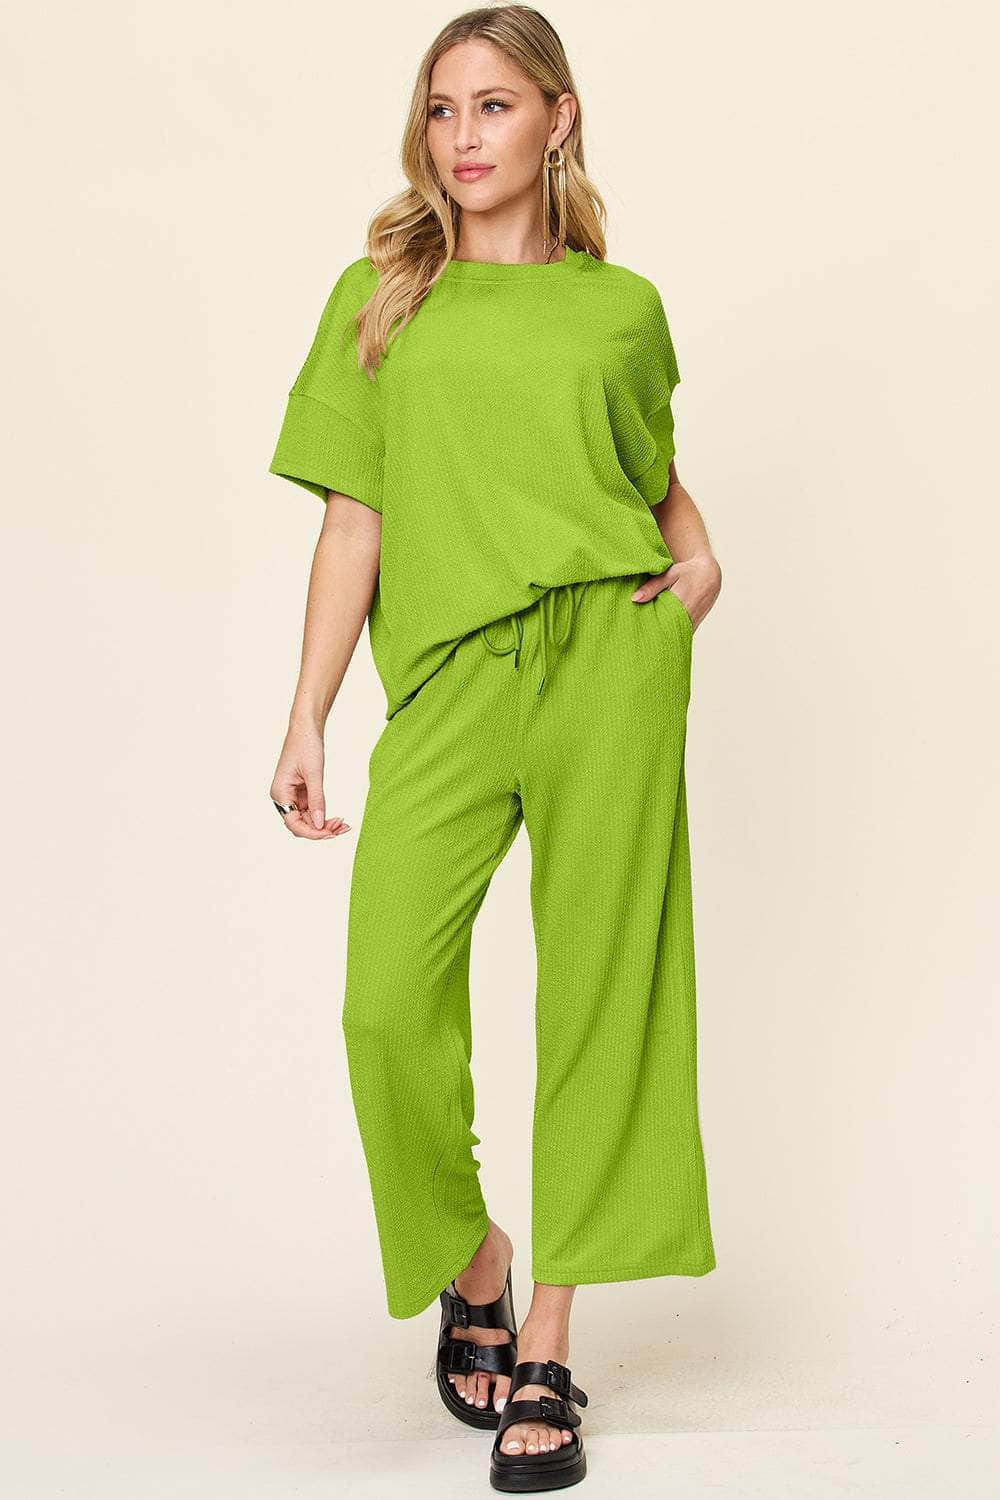 Double Take Full Size Texture Round Neck Short Sleeve T-Shirt and Wide Leg Pants Lime / S